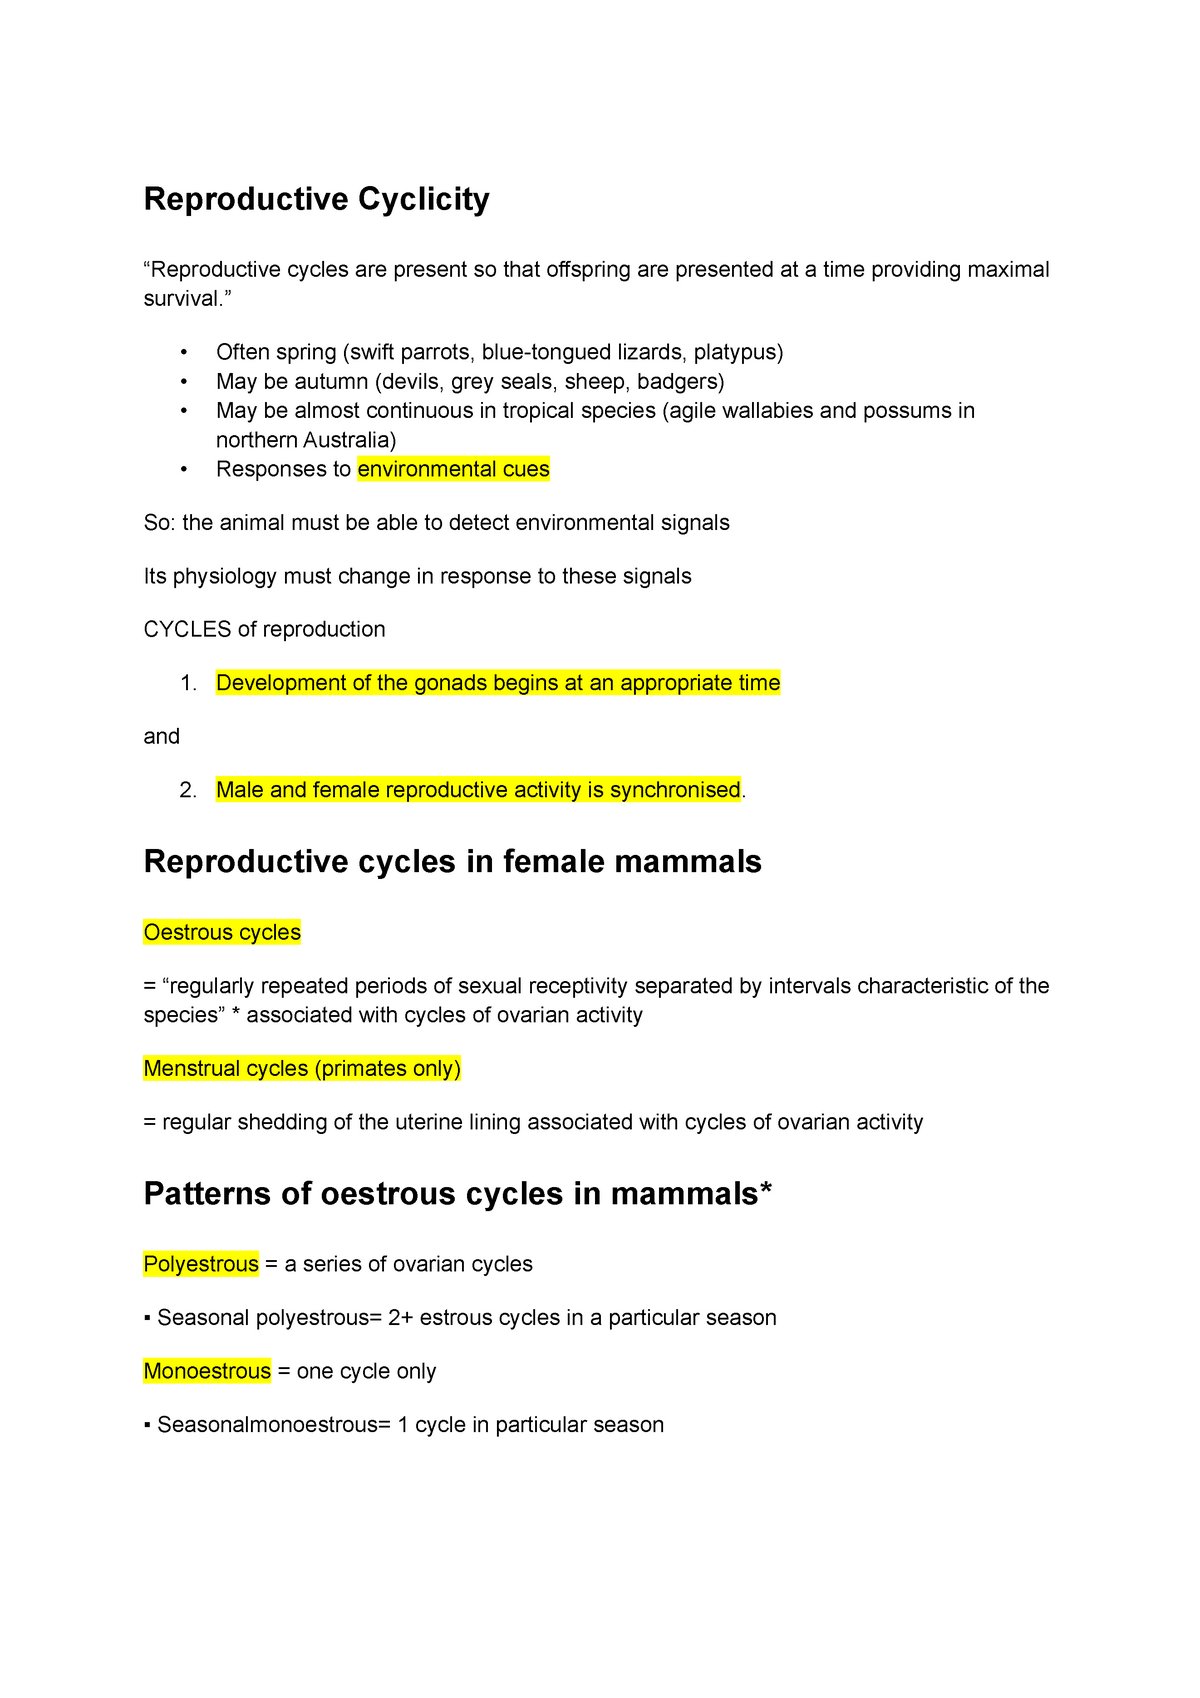 Reproduction cycles - Lecture notes 1 - Reproductive Cyclicity  “Reproductive cycles are present so - Studocu